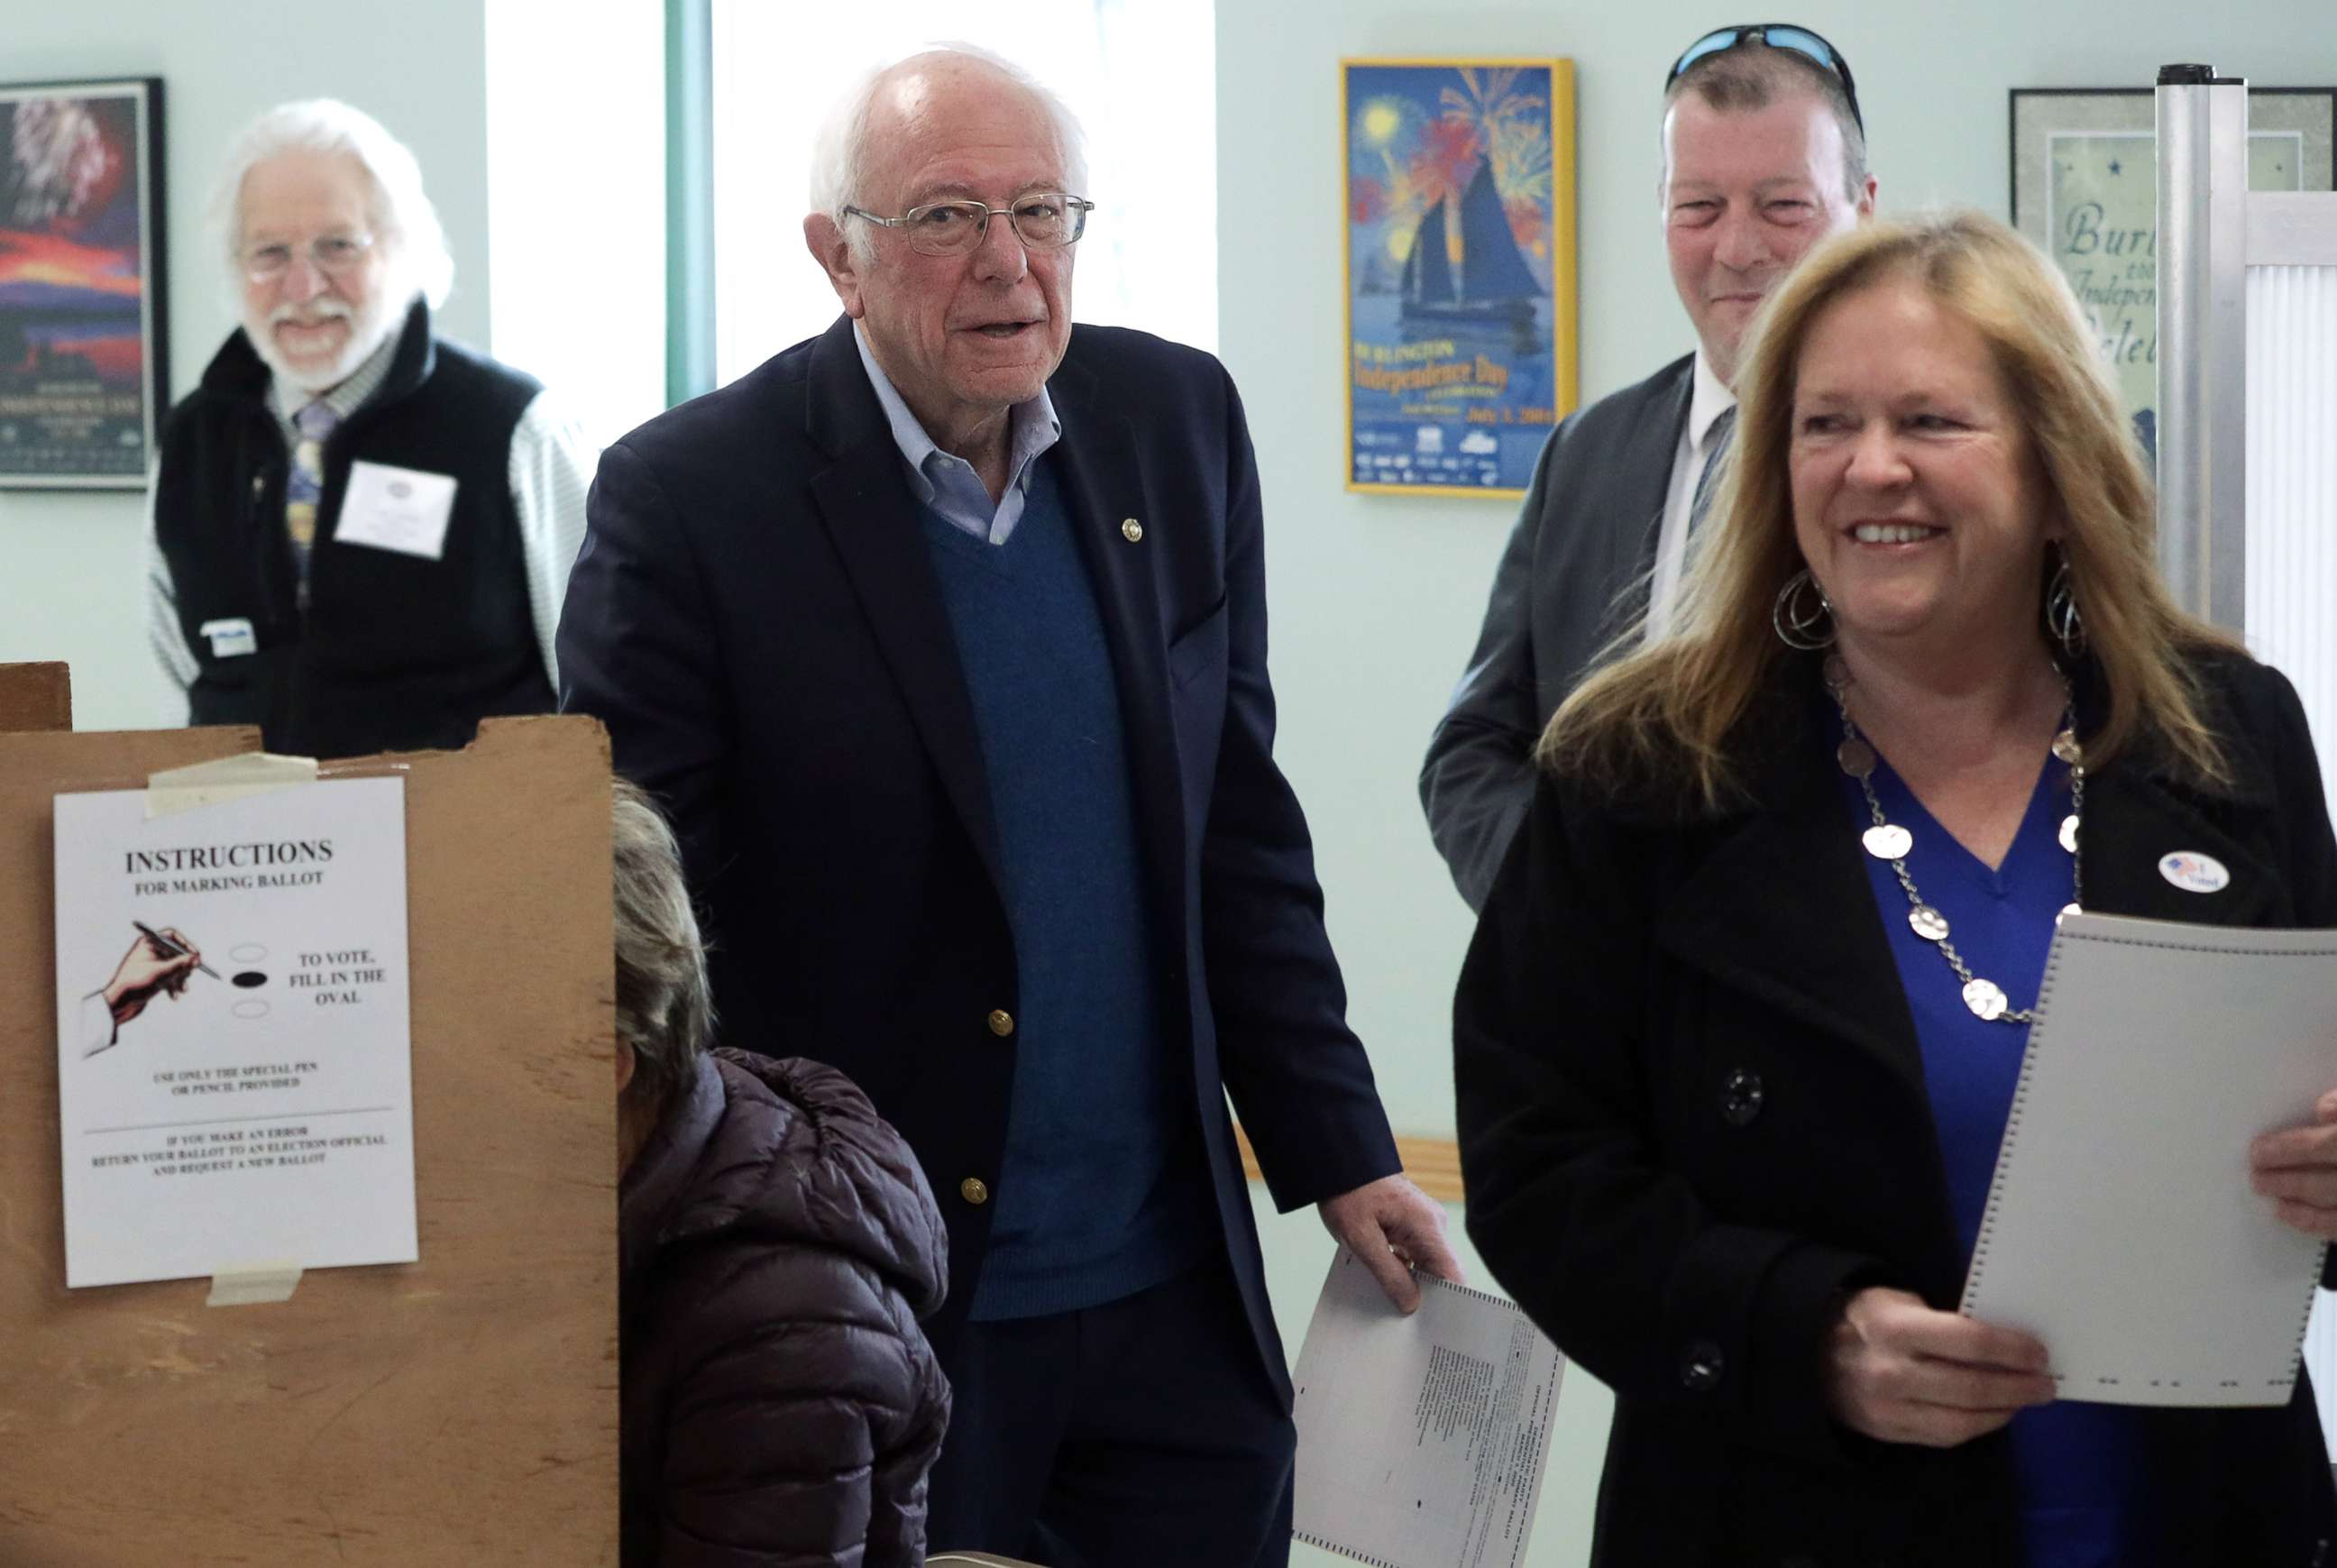 PHOTO:Democratic presidential candidate Sen. Bernie Sanders cast his vote with his wife Jane O'Meara Sanders at a polling place March 3, 2020 at Robert Miller Community Center in Burlington, Vt.